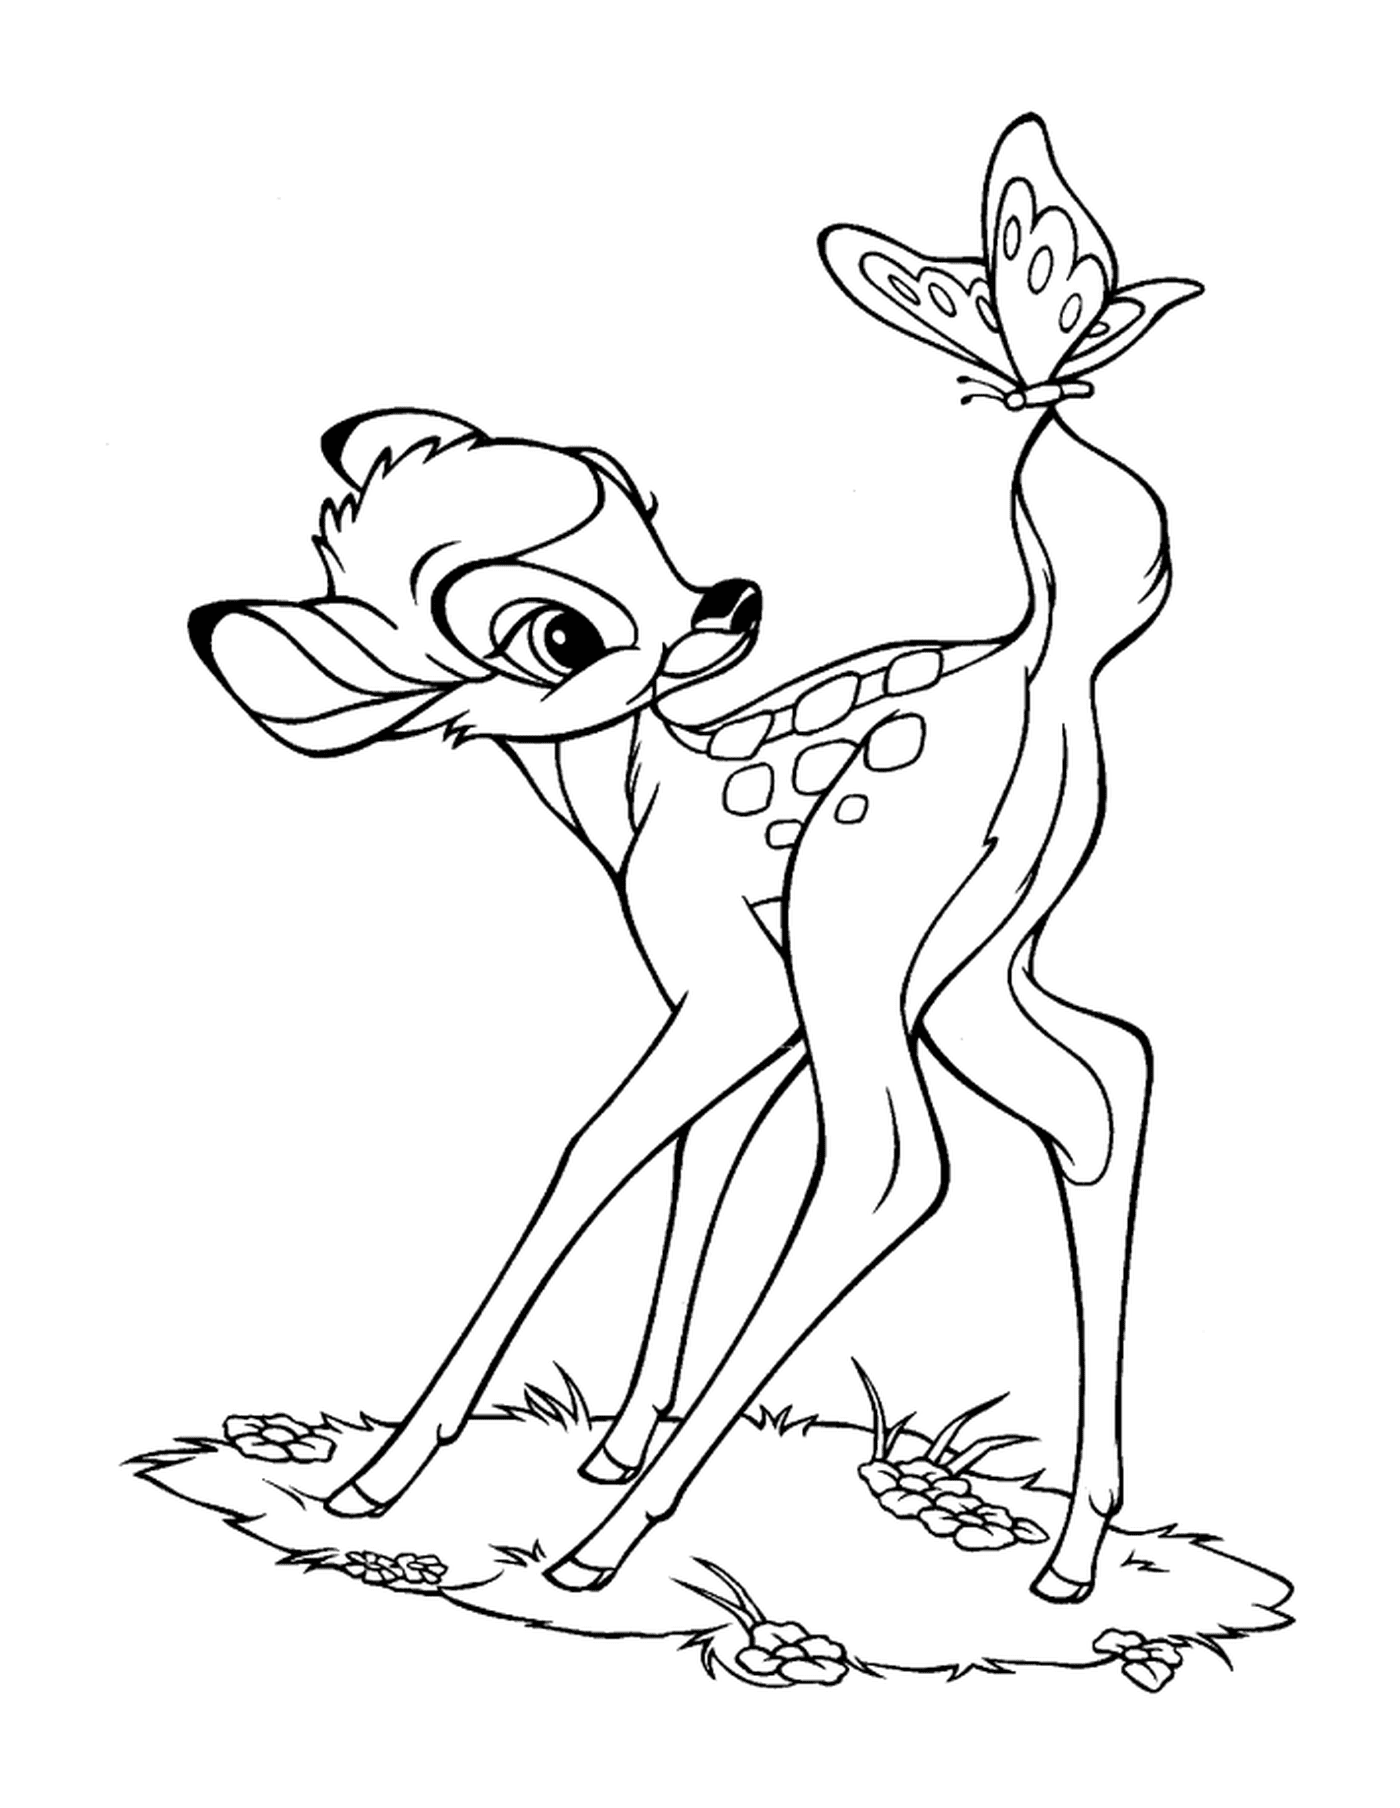  A deer and a butterfly 